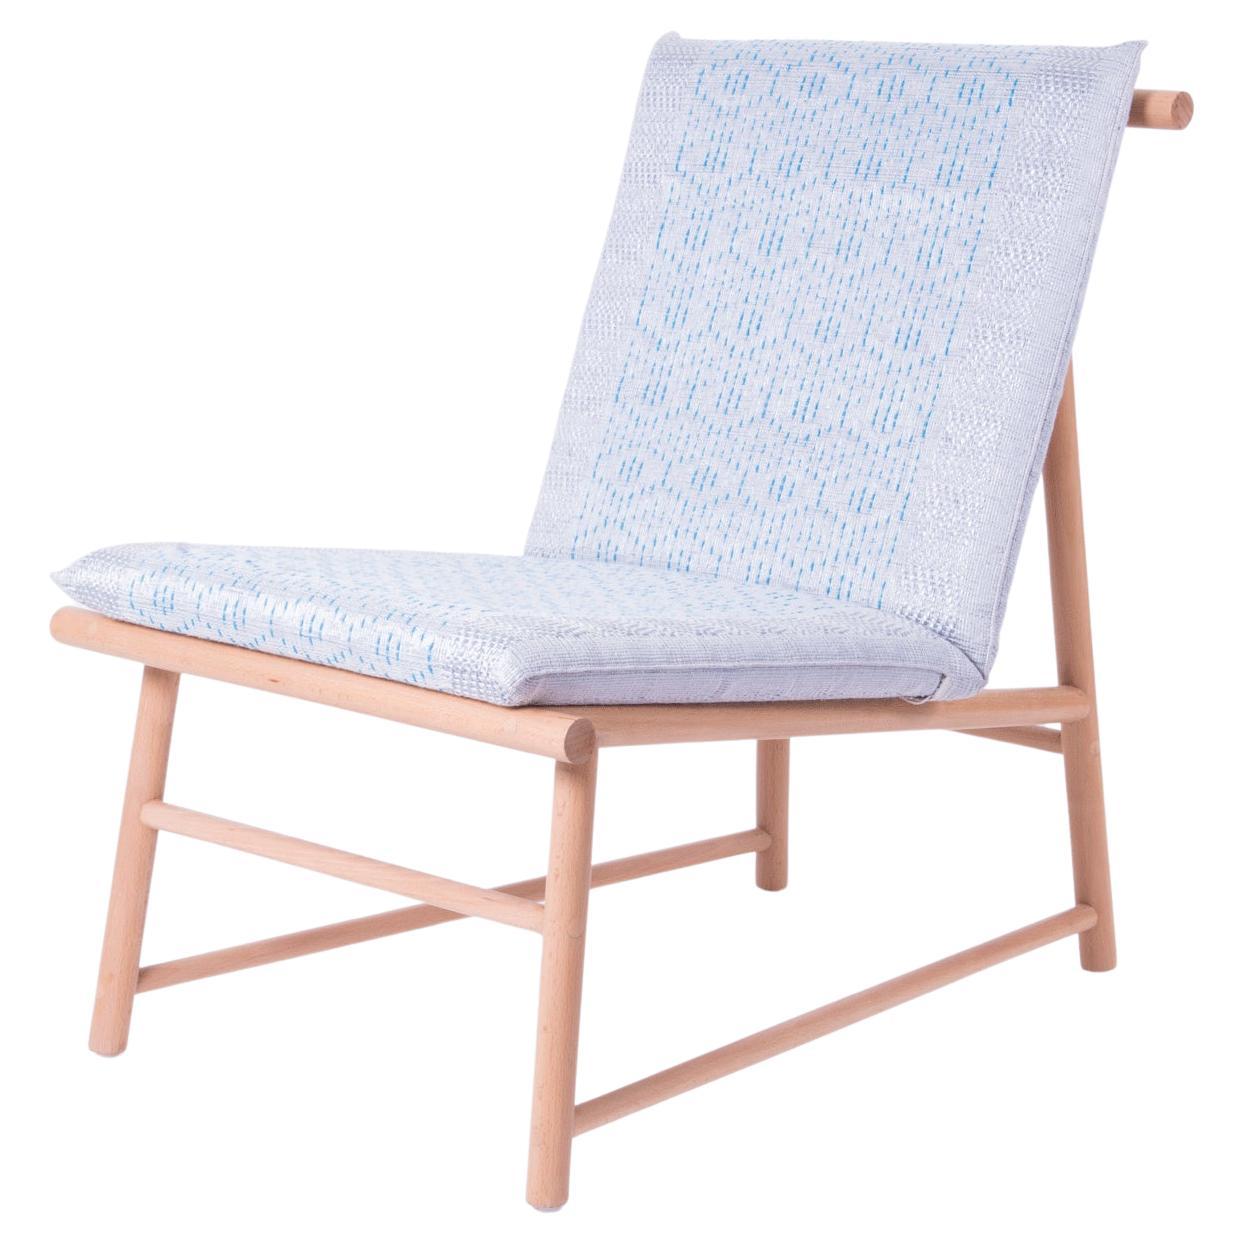 Easy Chair, Lounge Chair in Beech Wood with Handmade Raffia Textile in PedalLoom